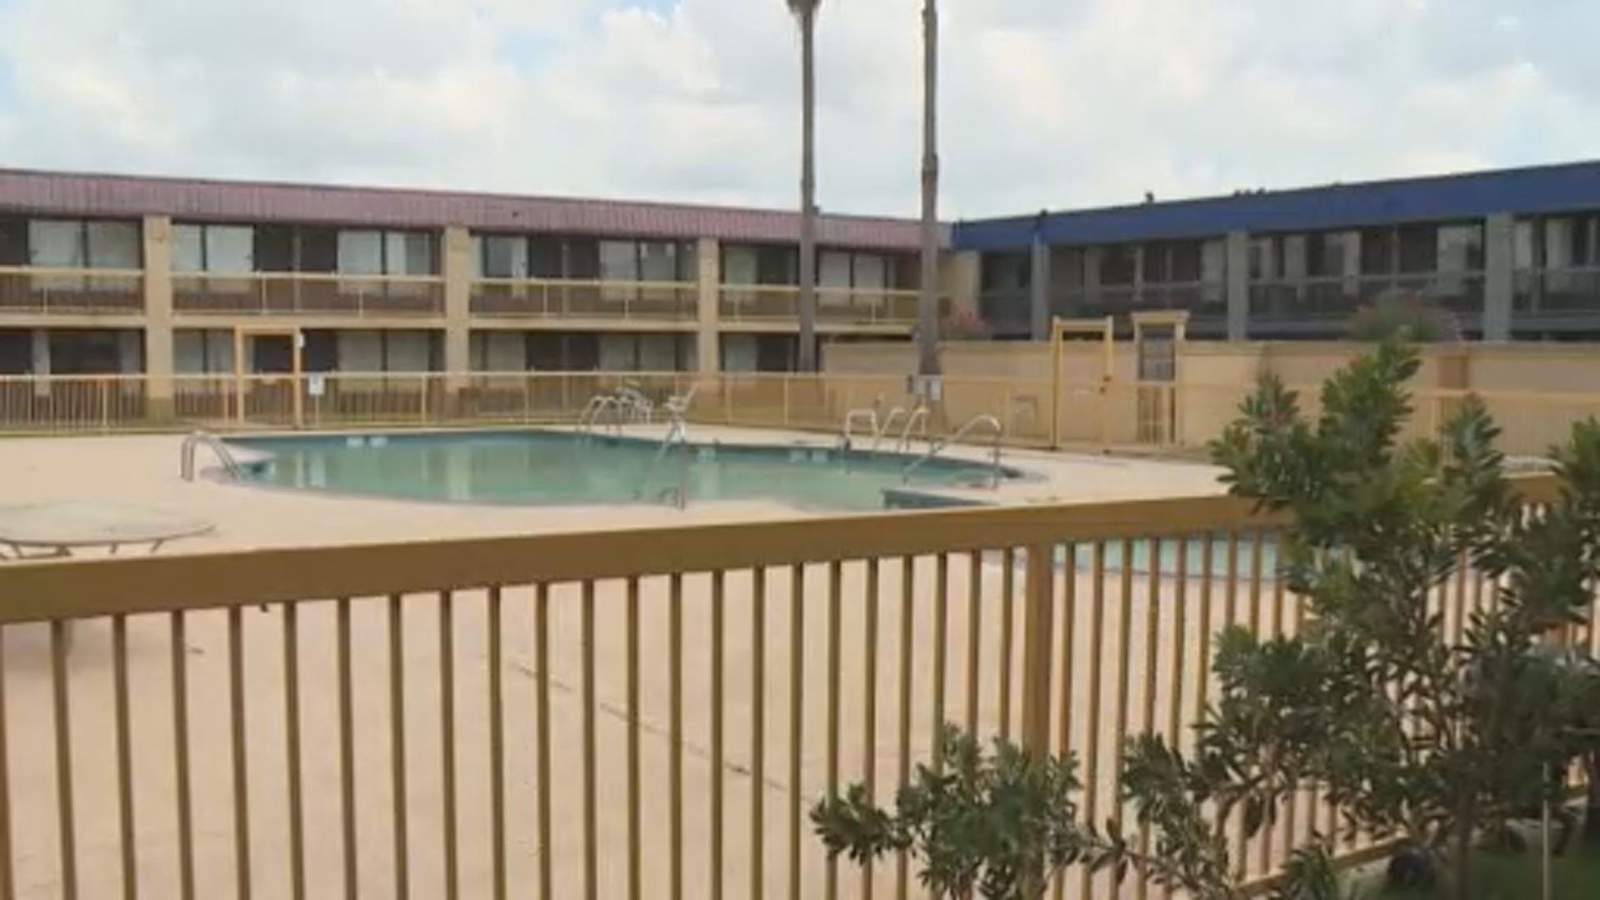 Questions lingering over teens death in north Harris County pool